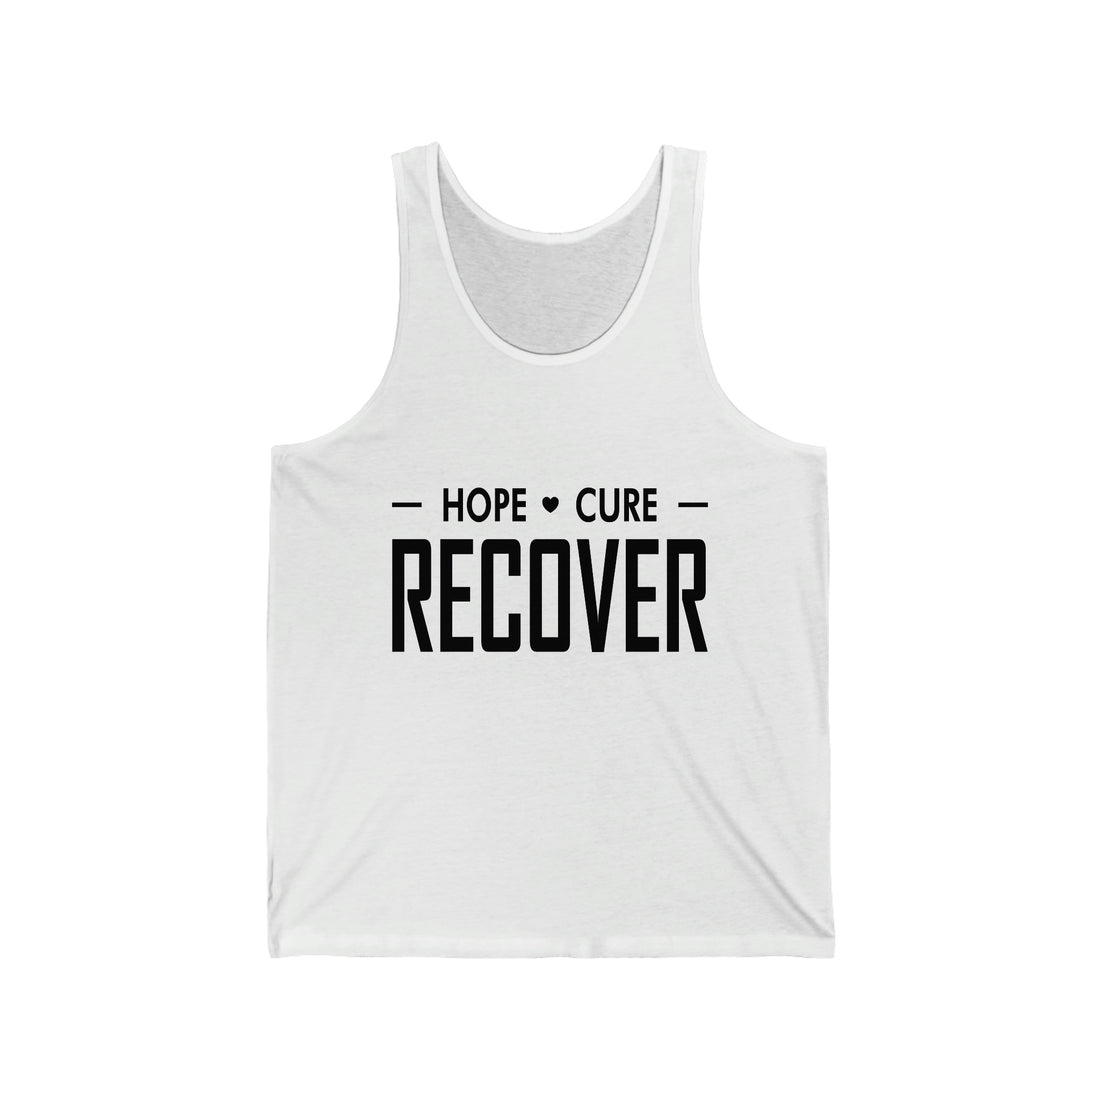 Hope Cure Recover - Unisex Jersey Tank Top